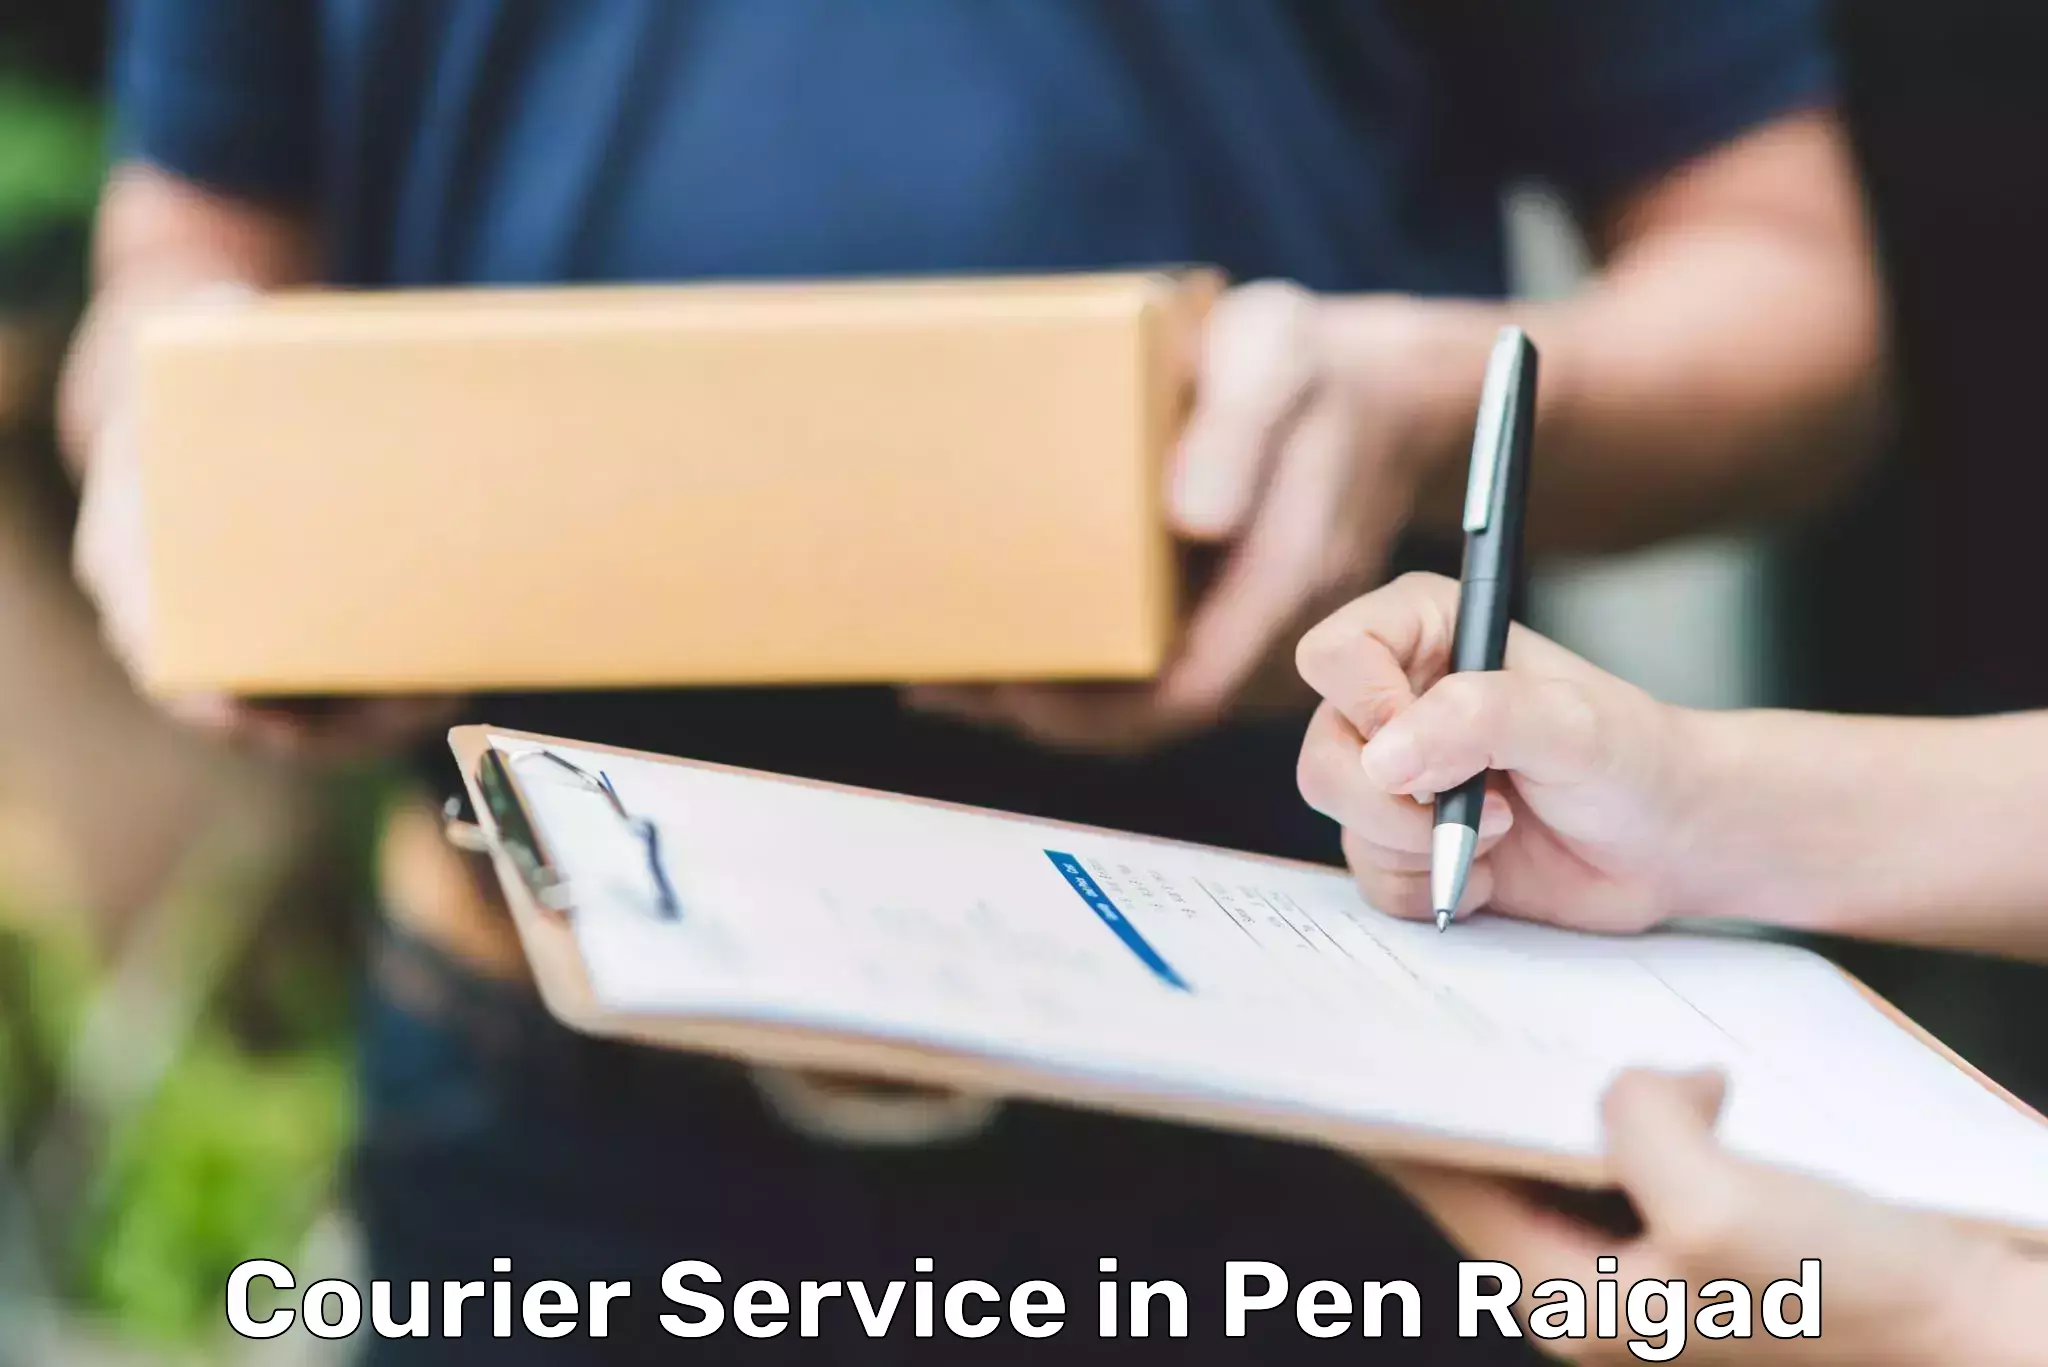 Courier service innovation in Pen Raigad